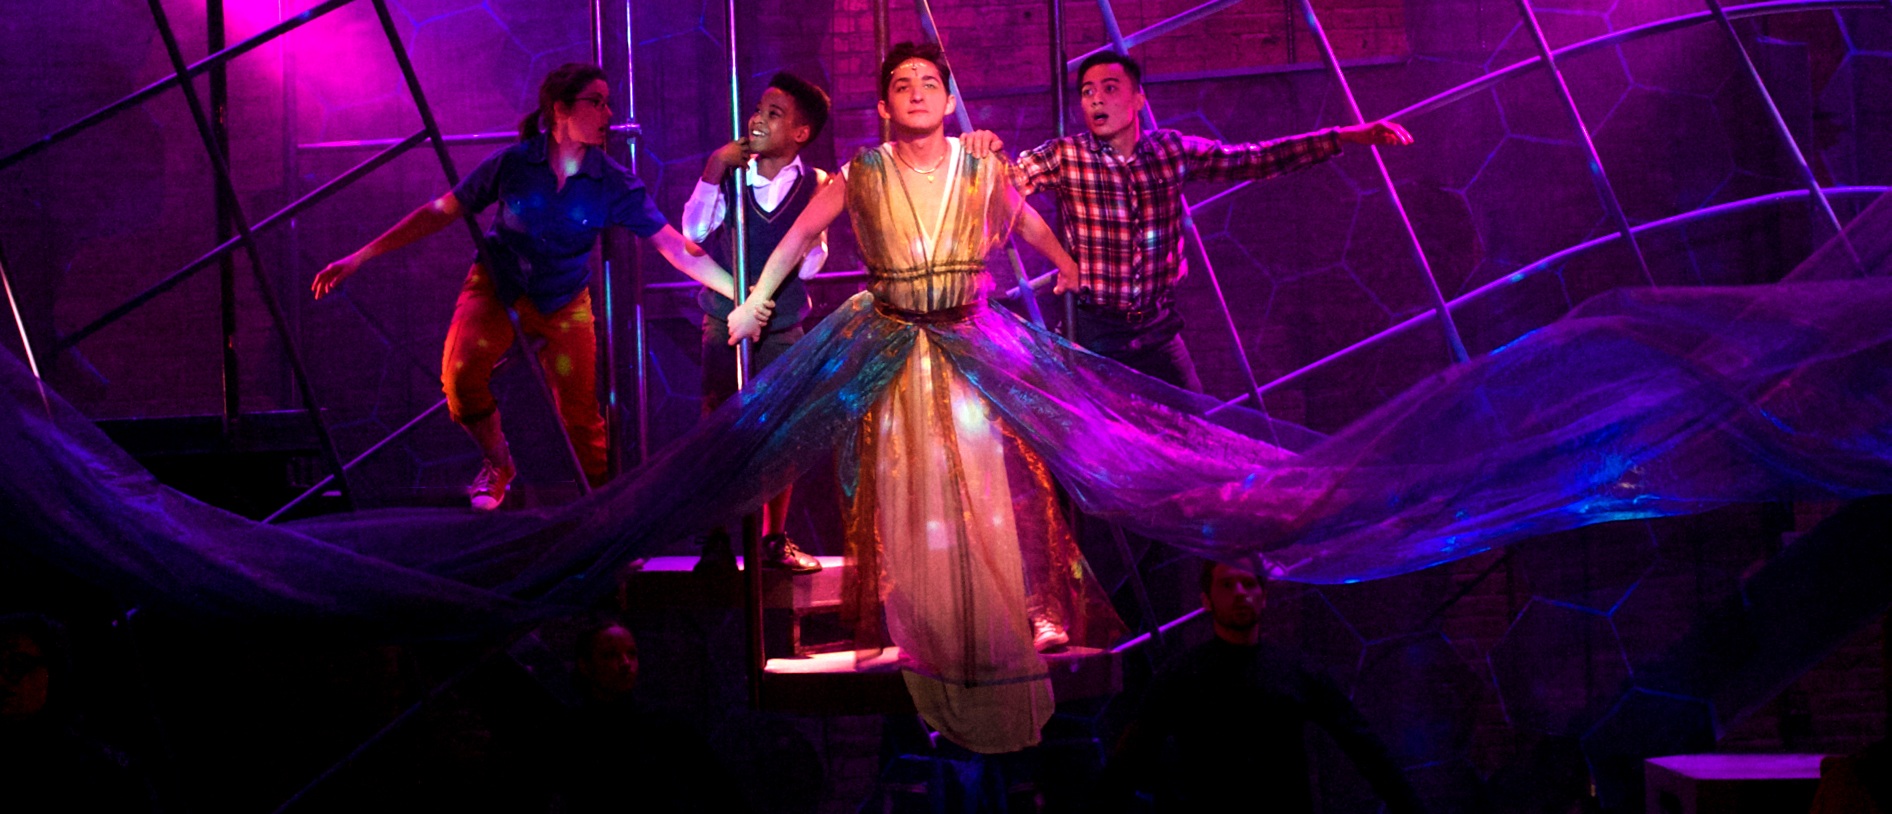   Jamie Cahill, Trent Davis, James Romney , and  Glenn   Obrero  in Lifeline Theatre’s production of  A Wrinkle in Time , Directed by  Elise Kauzlaric , Movement Direction by  Dan Plehal . 